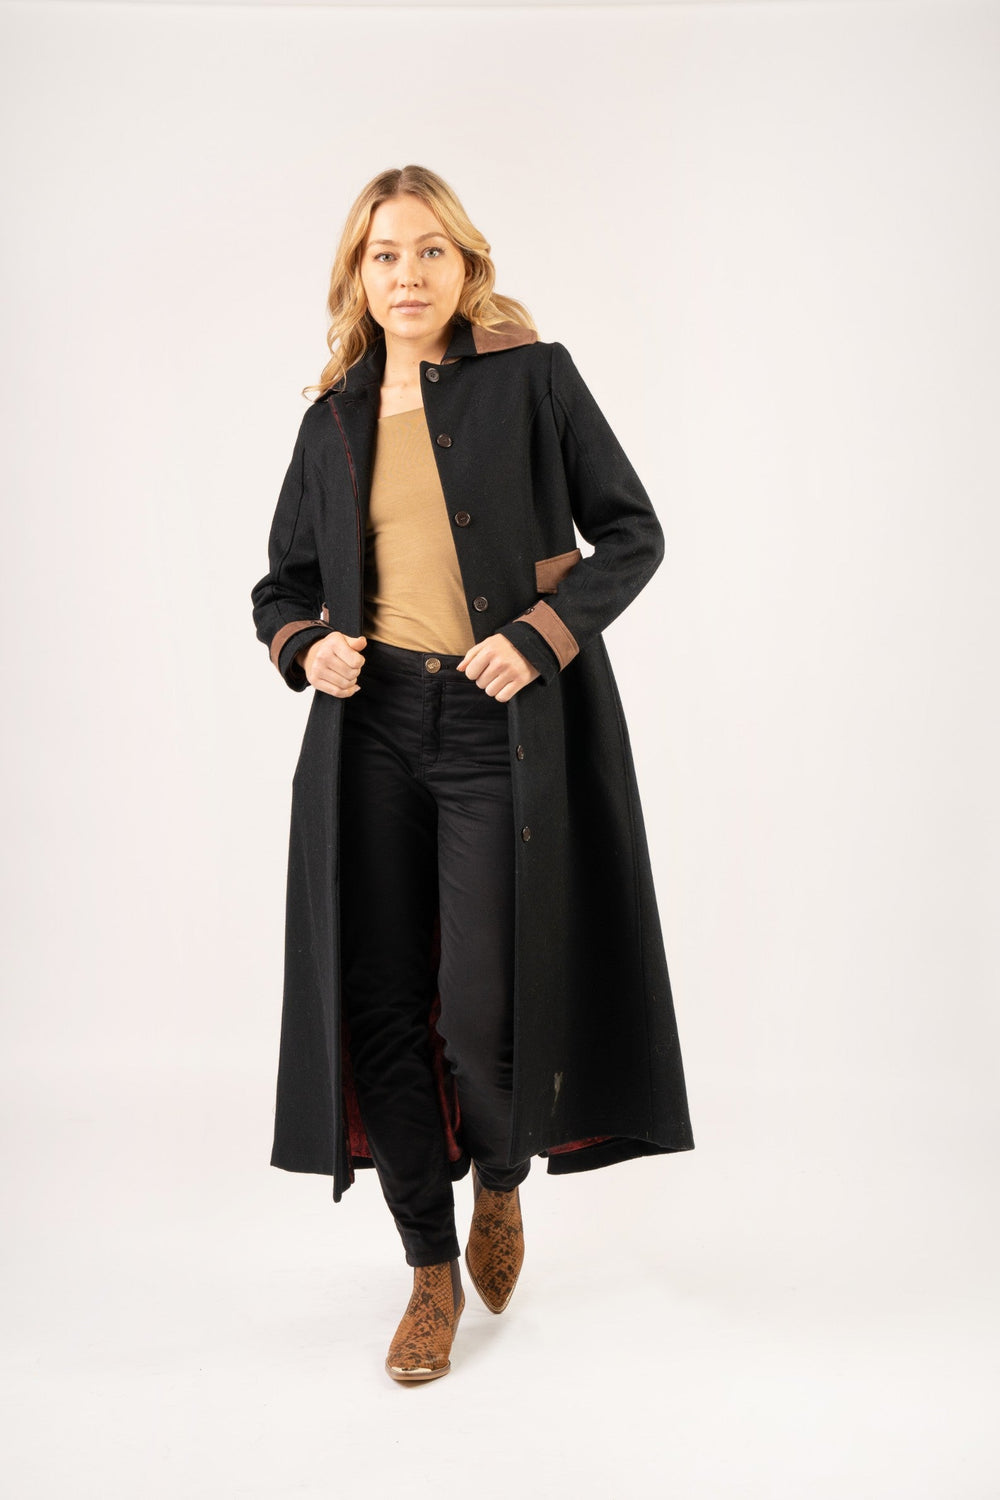 Our Elizabeth Wool Coat is back and this time in a rich navy with chocolate contrast details. Longer line for both warmth and elegance, our Elizabeth Wool Women's Coat is a timeless piece. With an adjustable belt feature you can bring the coat in to accentuate the female silhouette or to provide more freedom of movement when wearing extra layers.